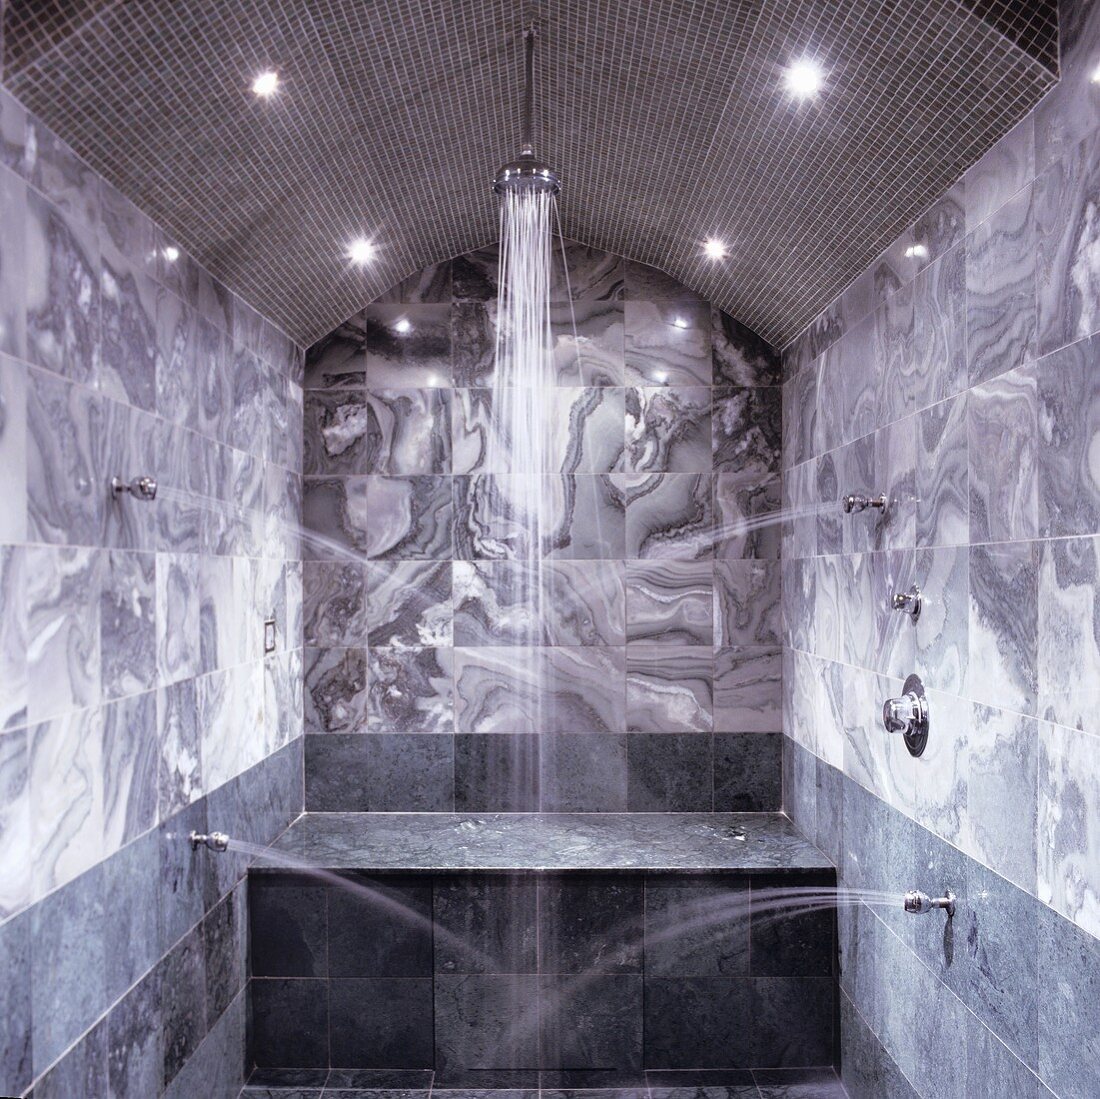 A marble bathroom oasis - water pouring out of side spouts with a shower head between spotlights